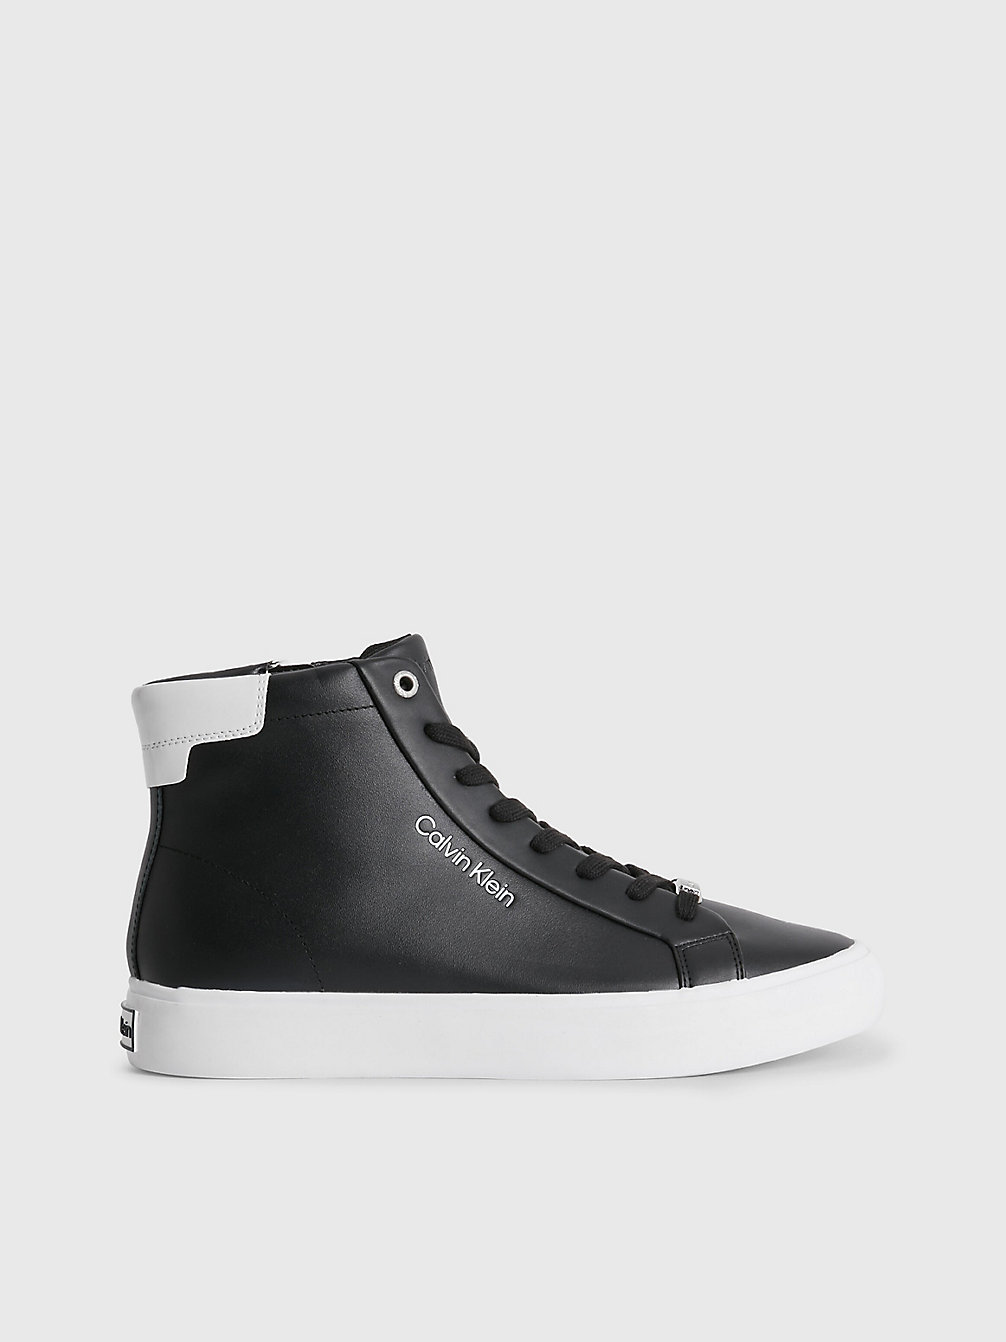 CK BLACK Leather High-Top Trainers undefined women Calvin Klein